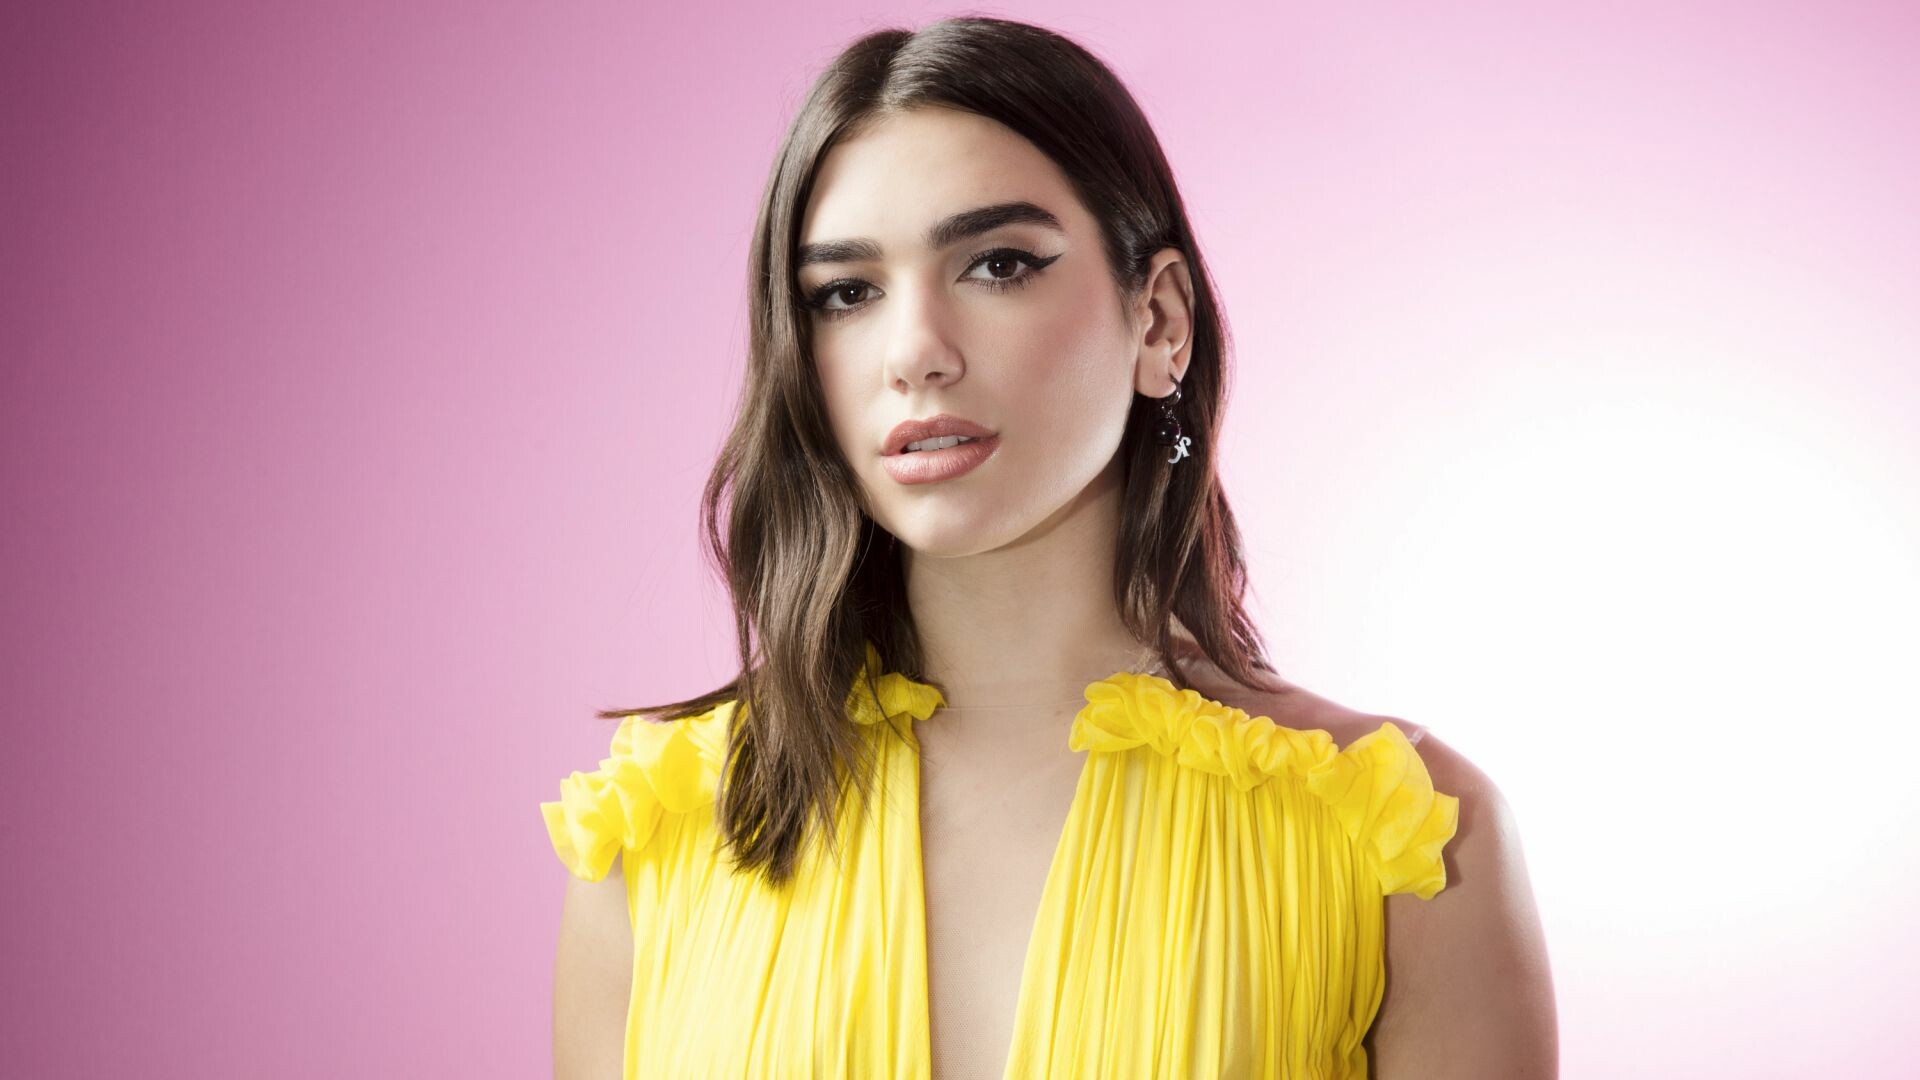 Dua Lipa: Released the second remix of "Levitating", featuring American rapper DaBaby, on 2 October 2020. 1920x1080 Full HD Wallpaper.